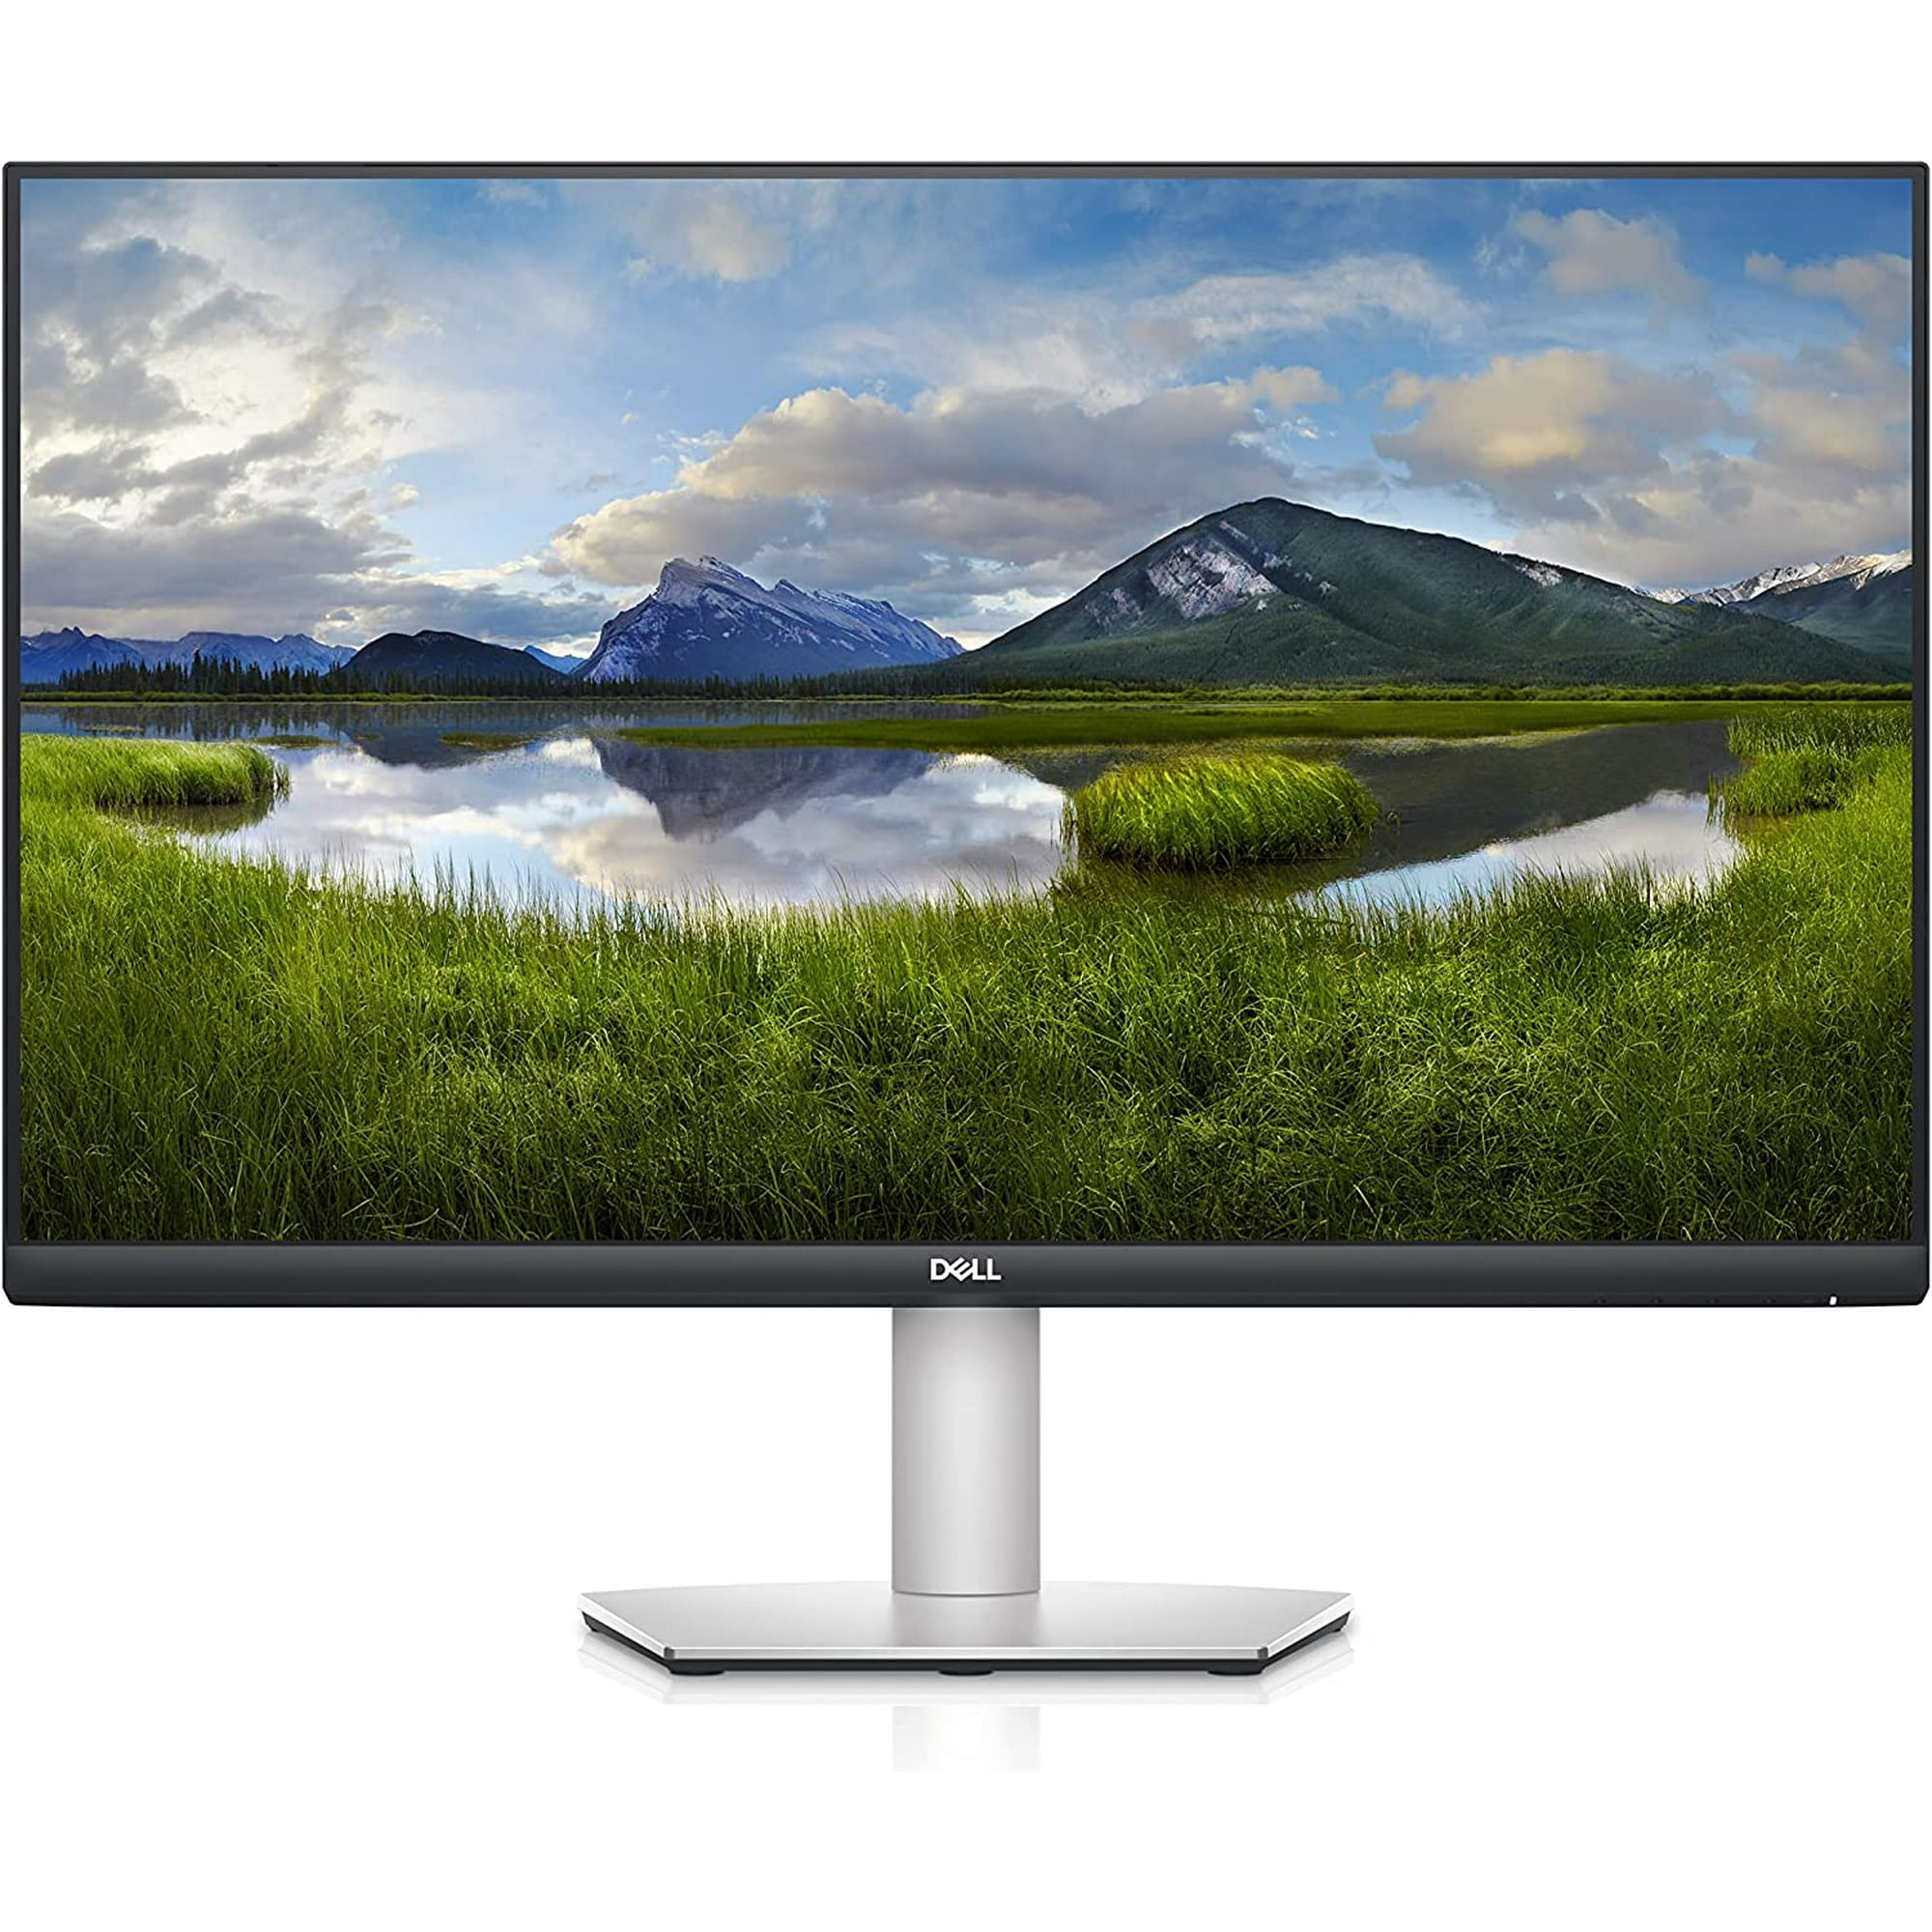 Certified Refurbished Dell 27